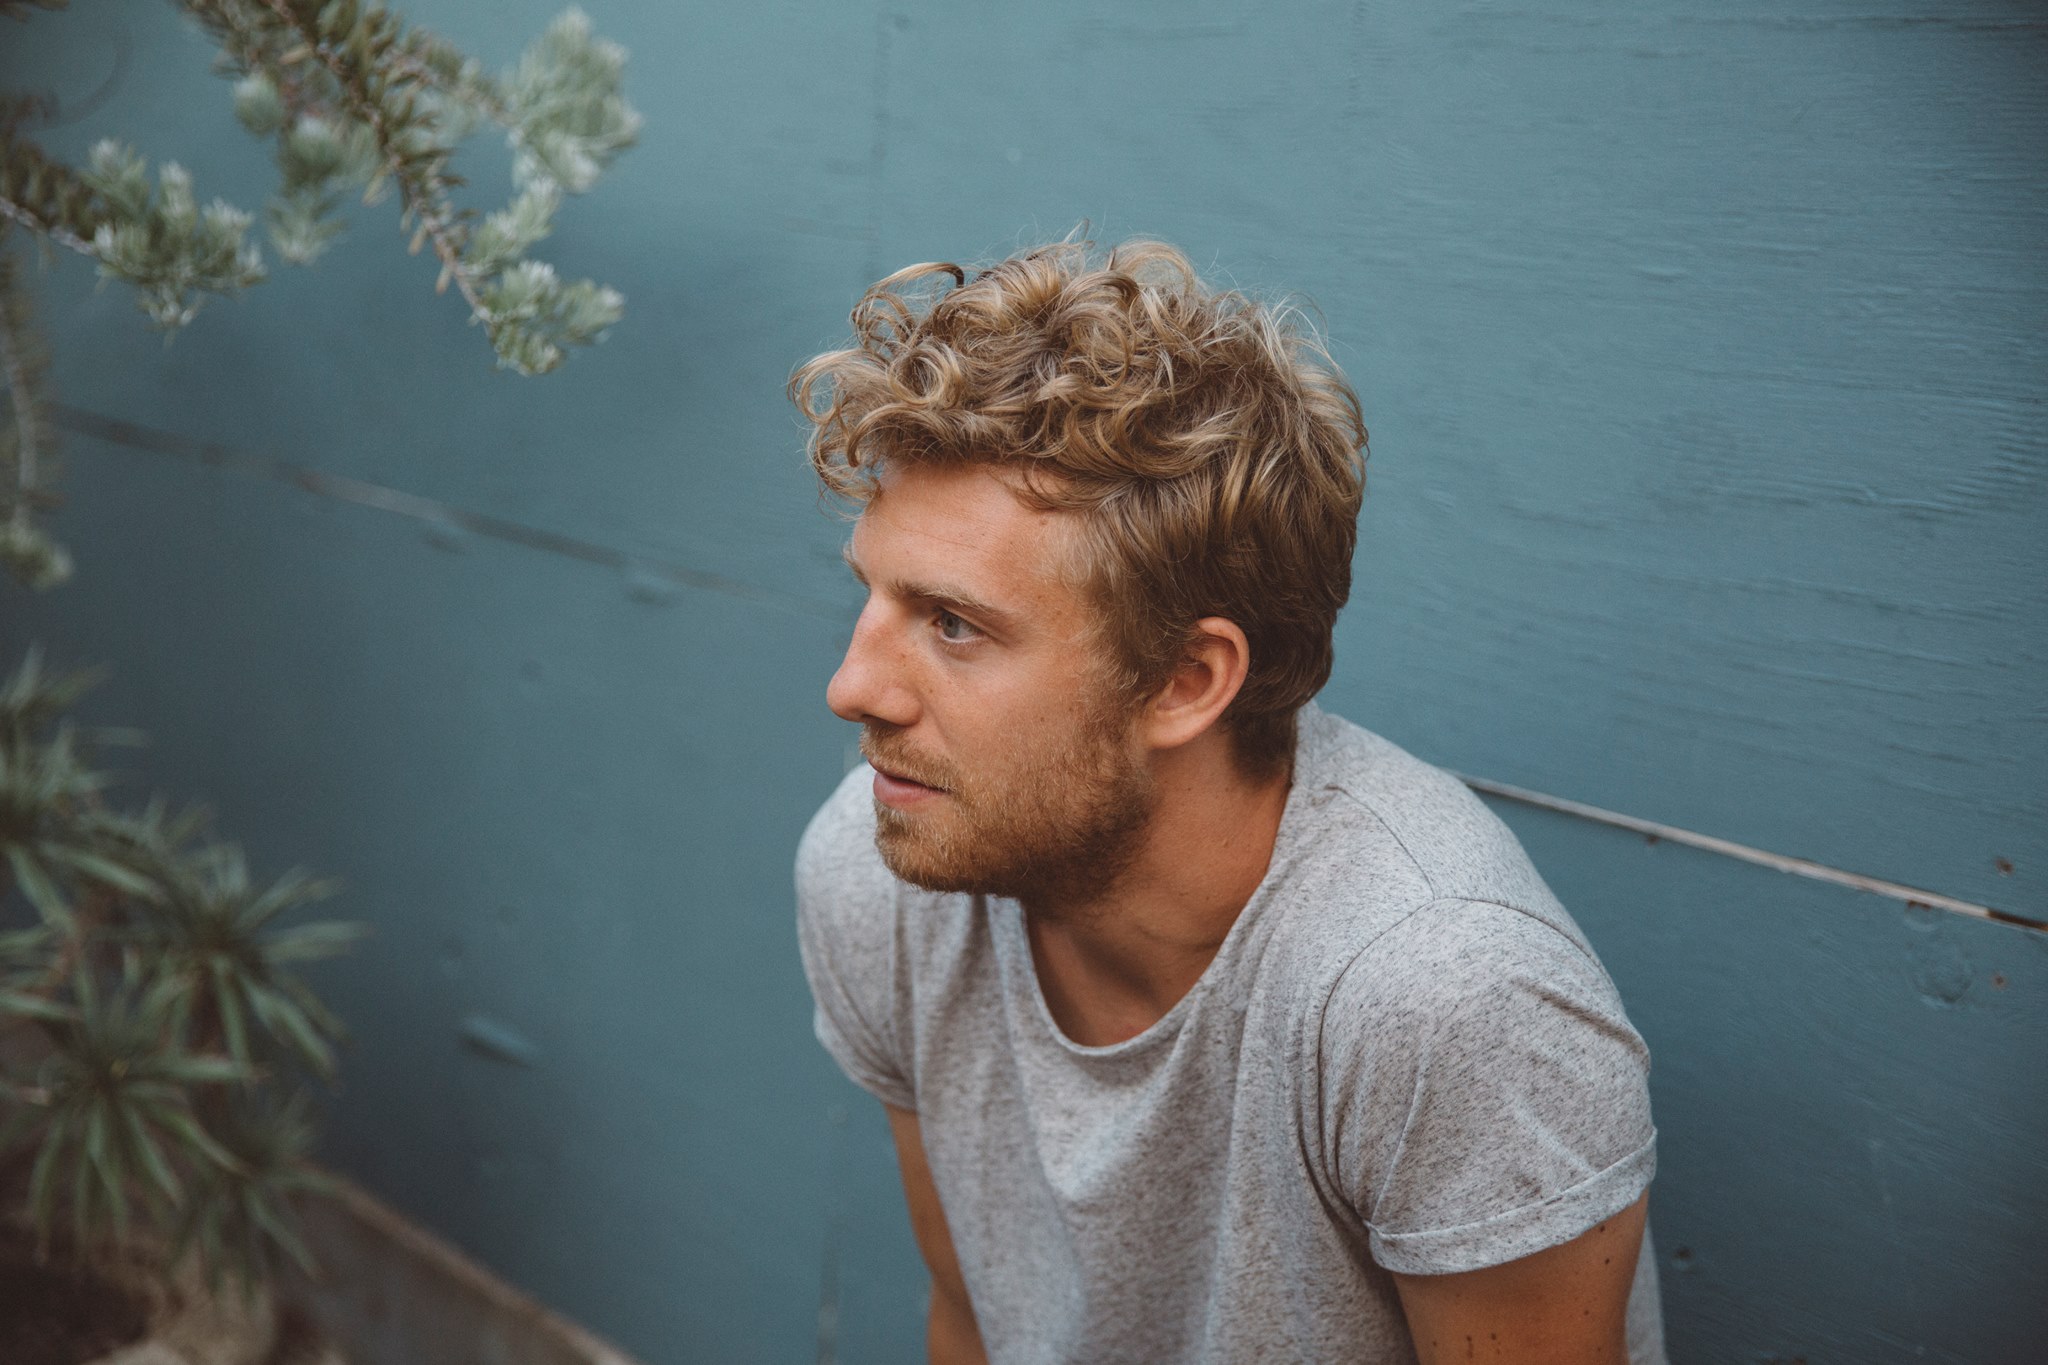 Pieces - Song by Andrew Belle - Apple Music